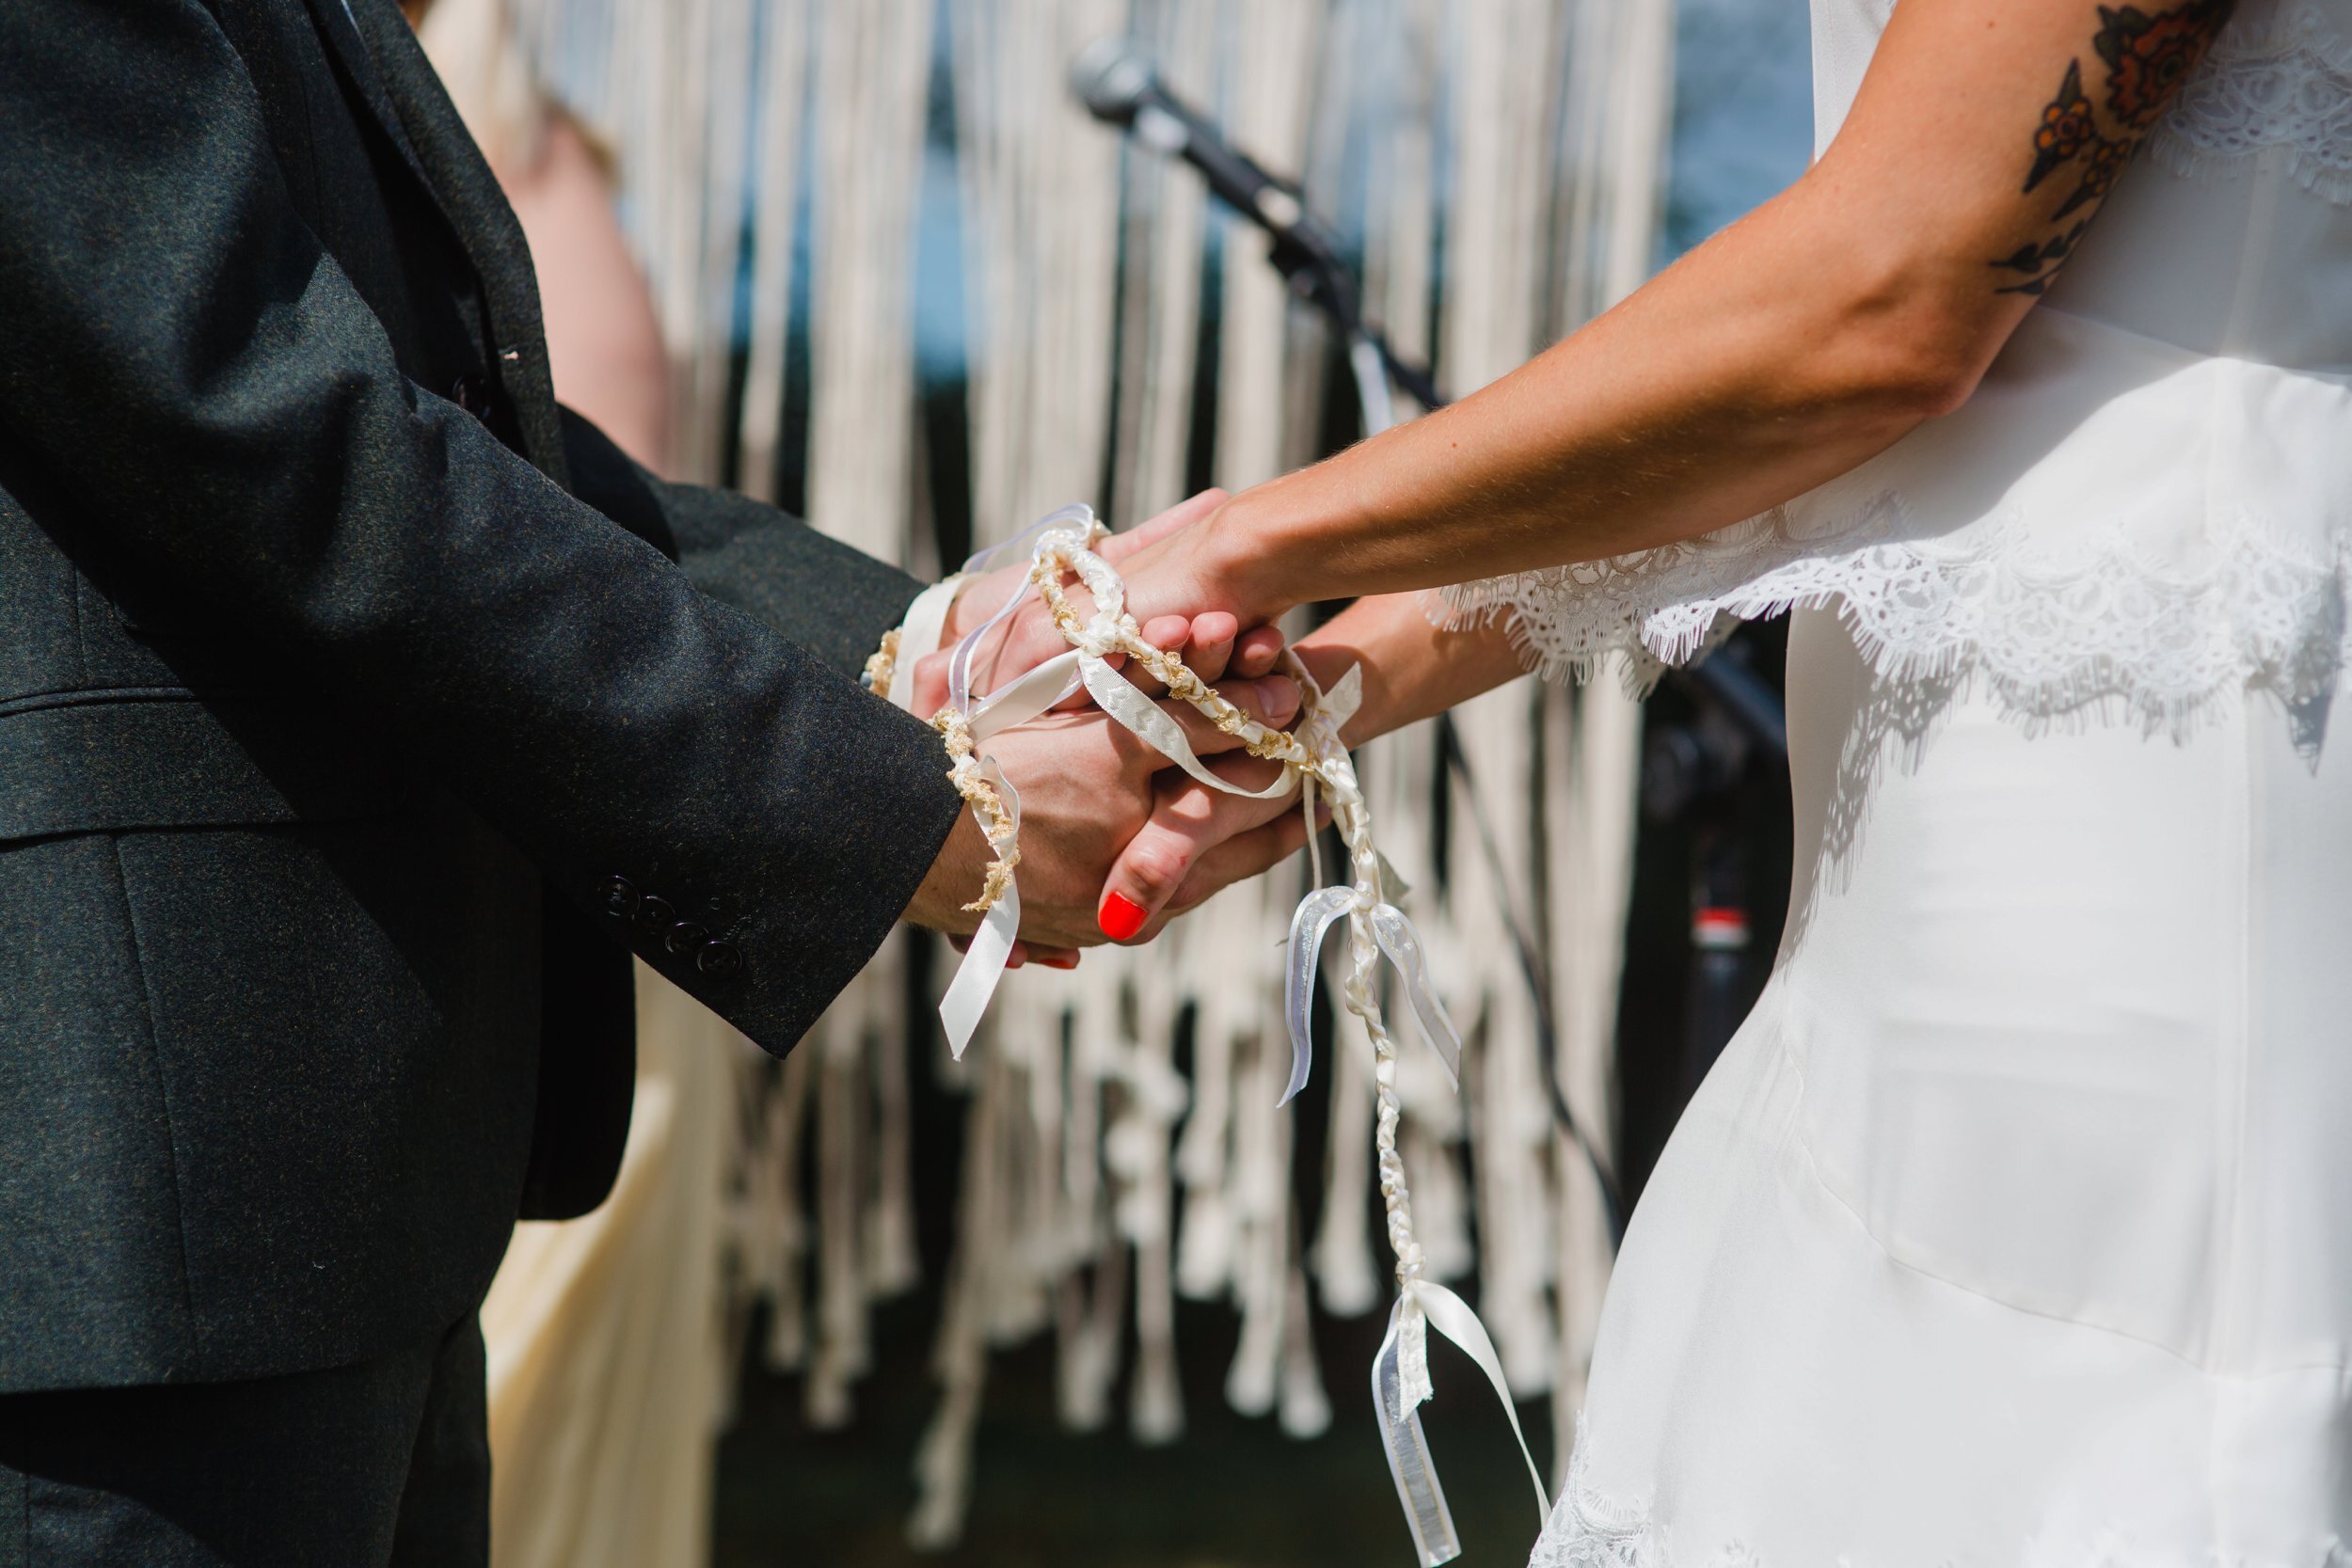 hand fastening during a wedding cermony